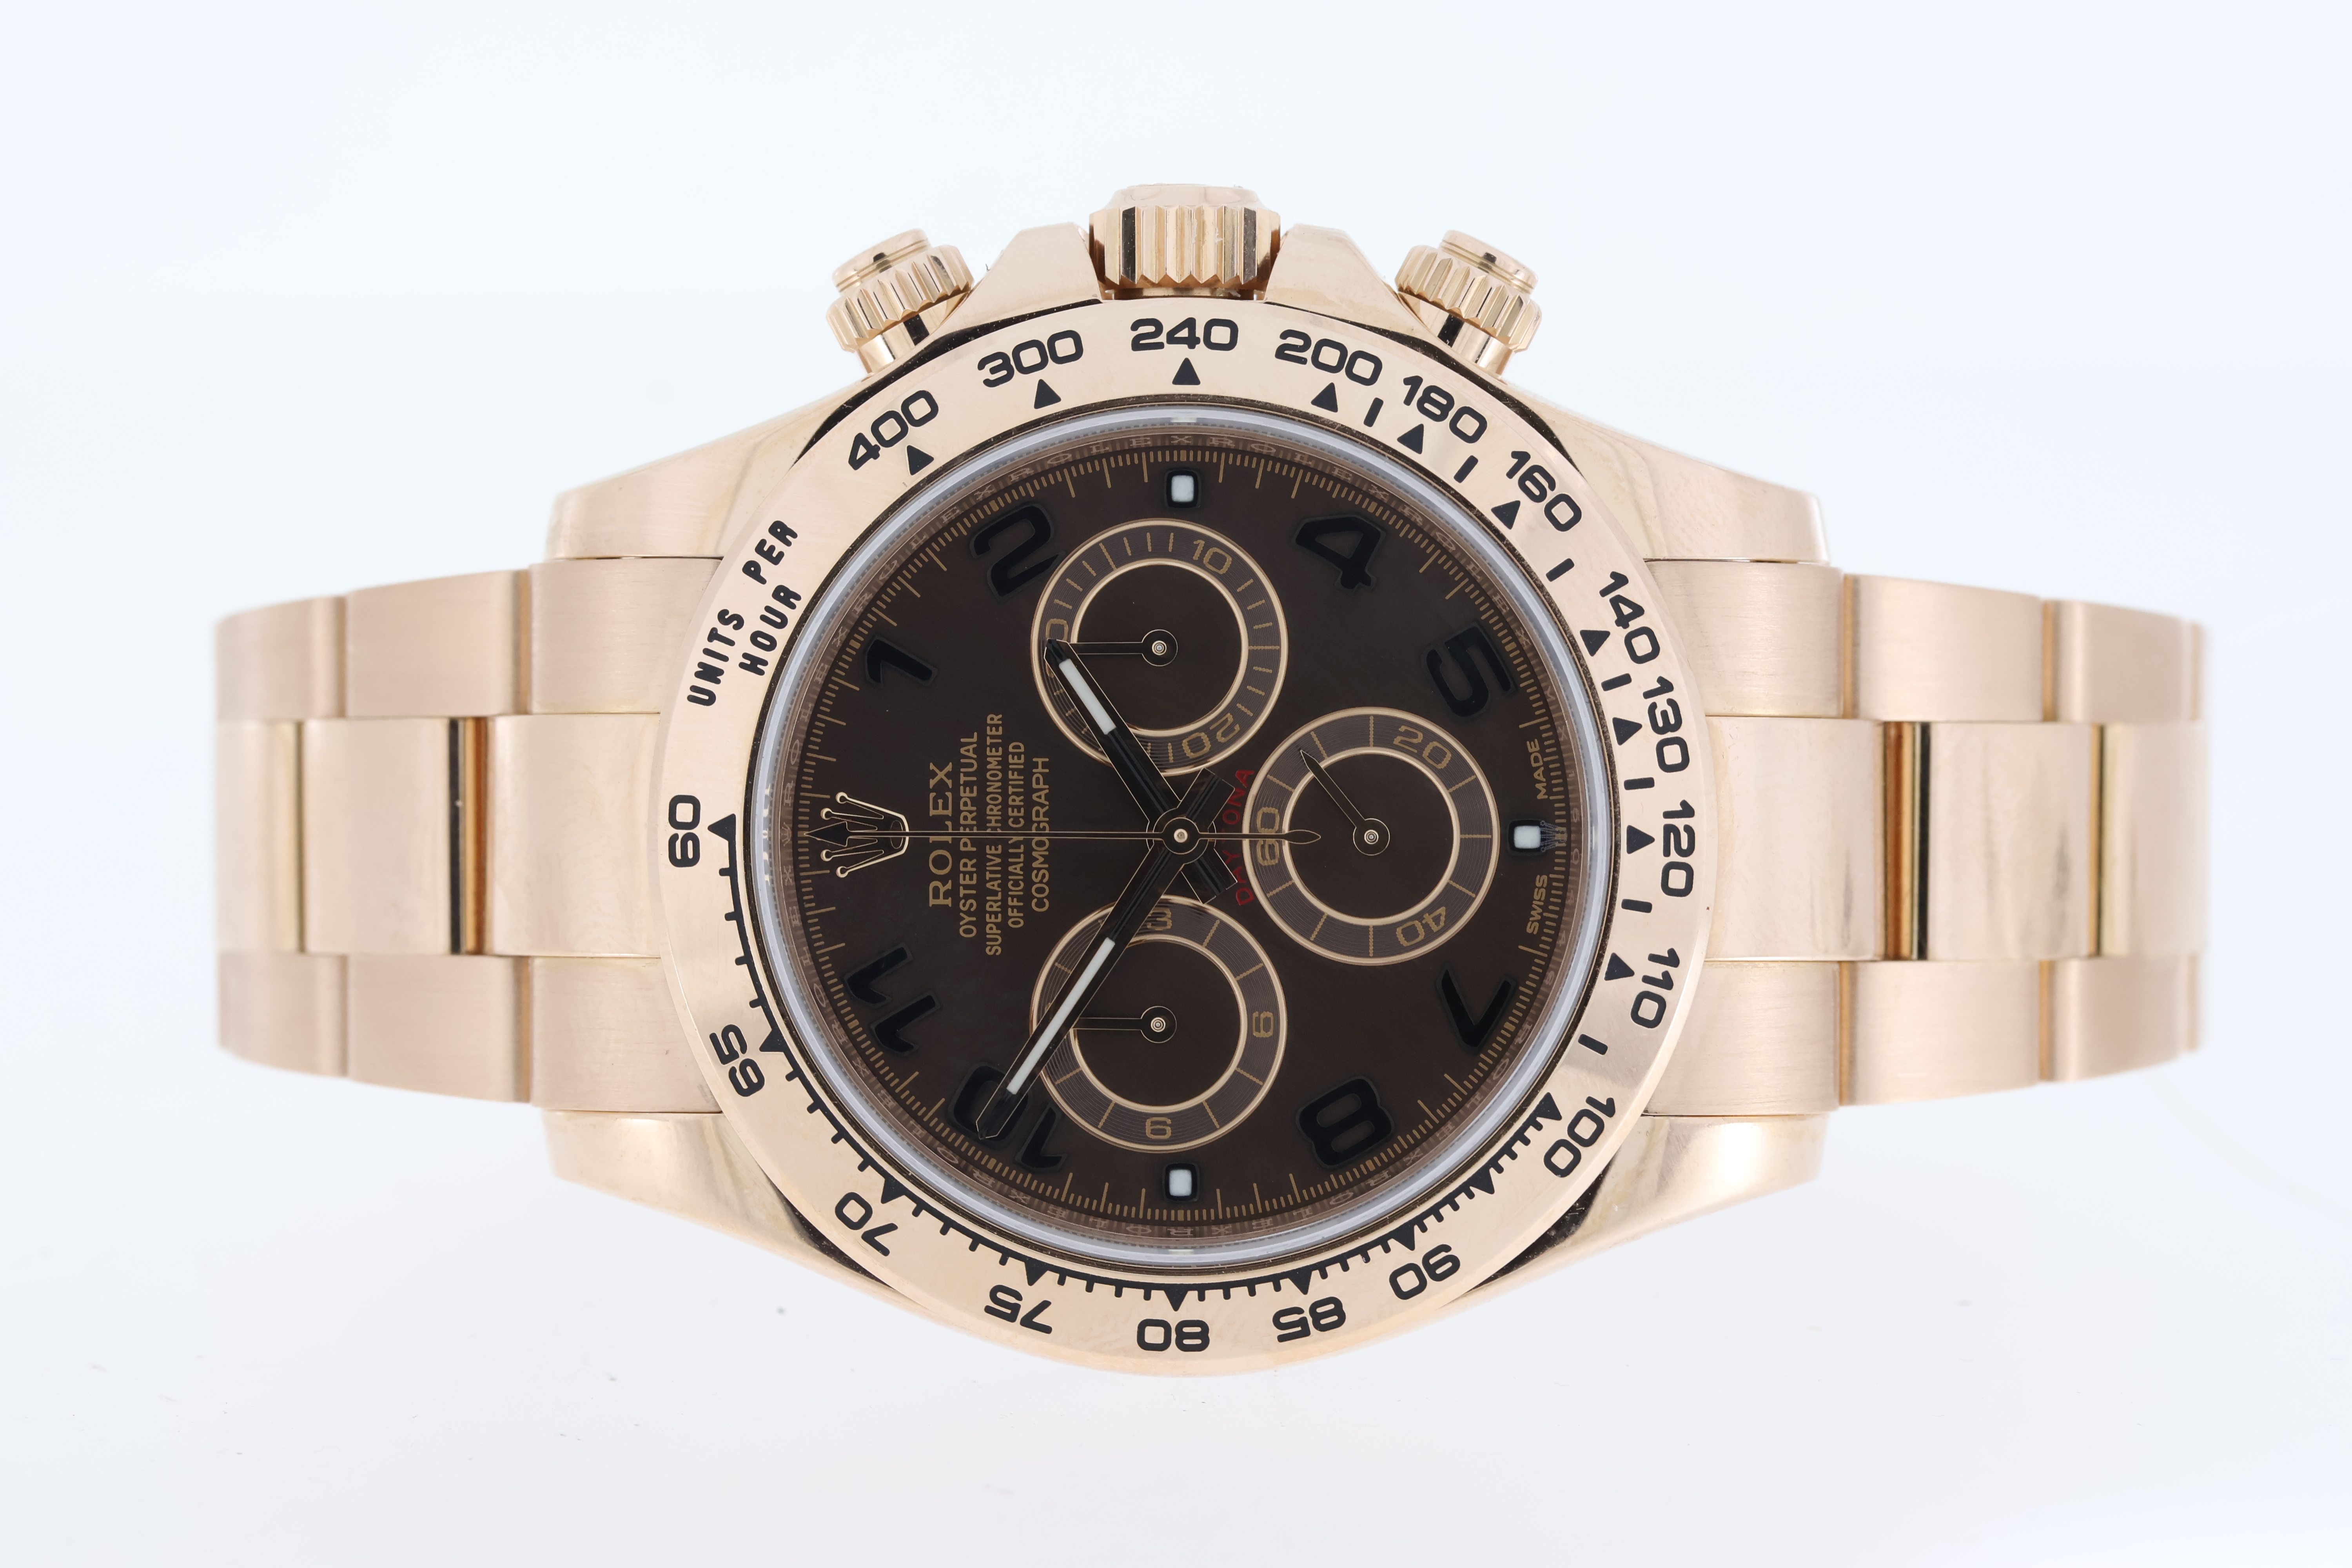 18ct Rolex Daytona Rose Gold Reference 16505 with Box - Image 2 of 7